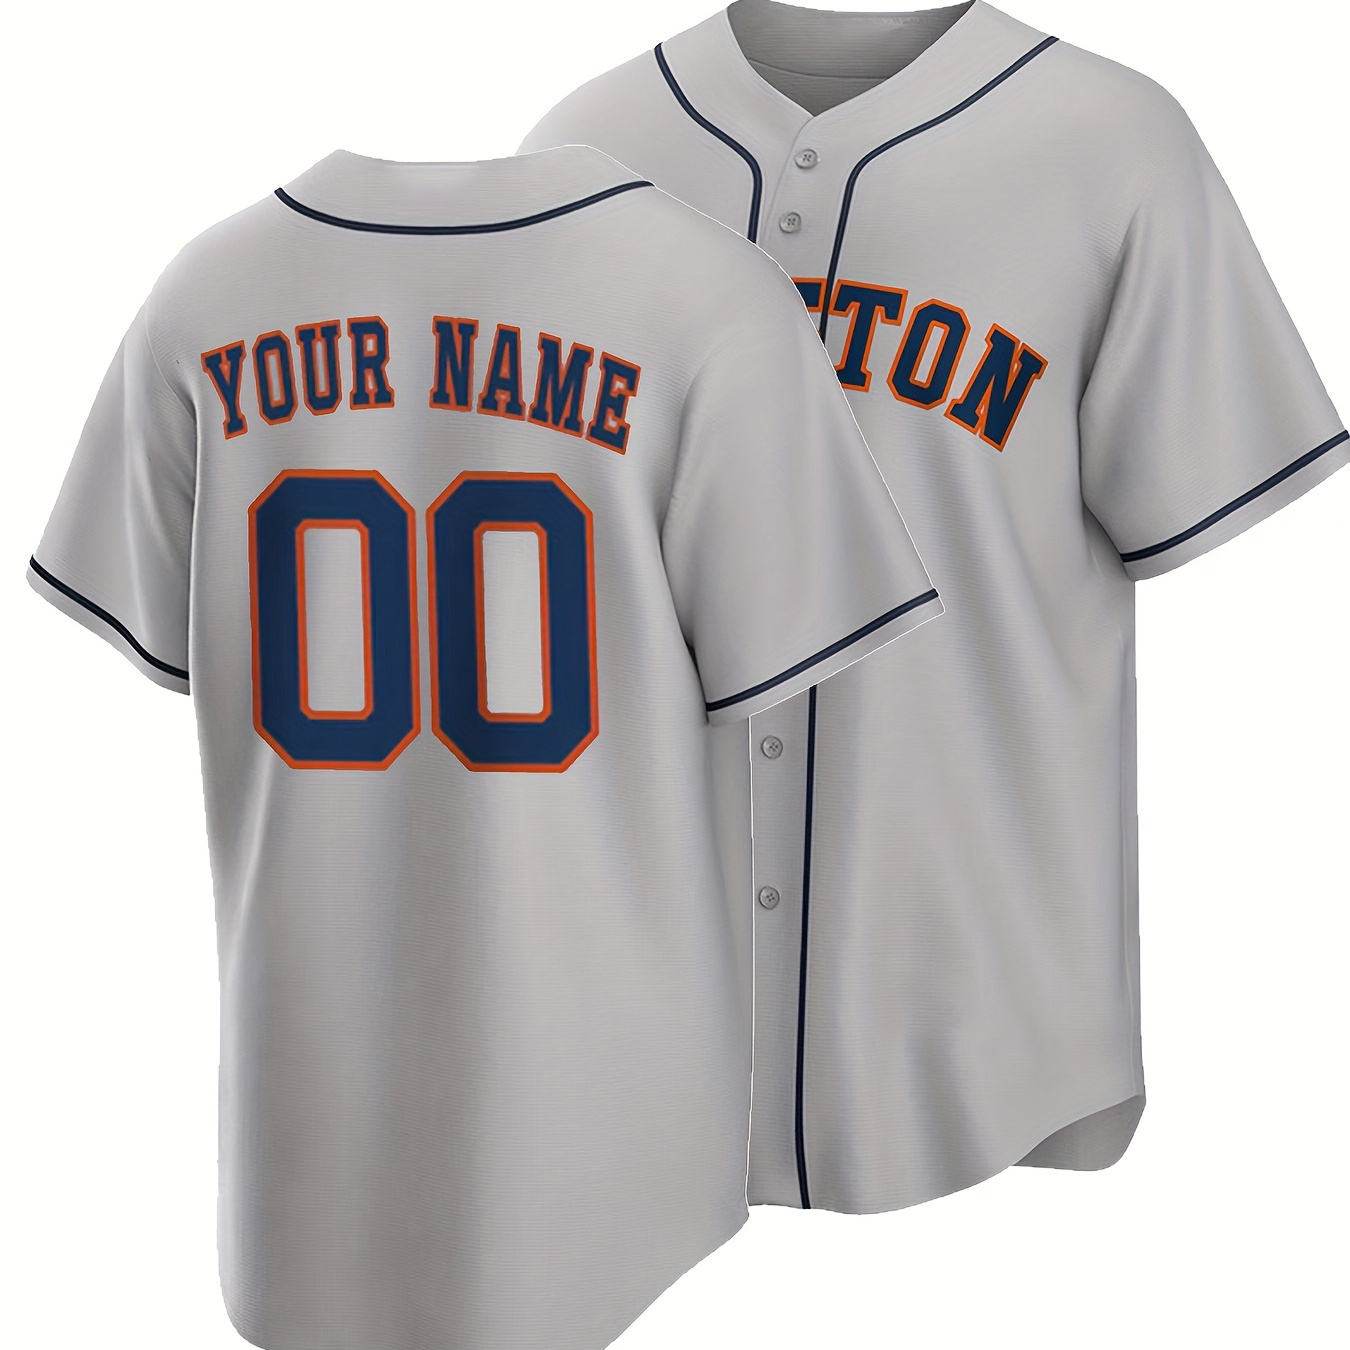 

Men's "houston" Baseball Jersey With Customized Name And Number, Comfy Top For Summer Sport